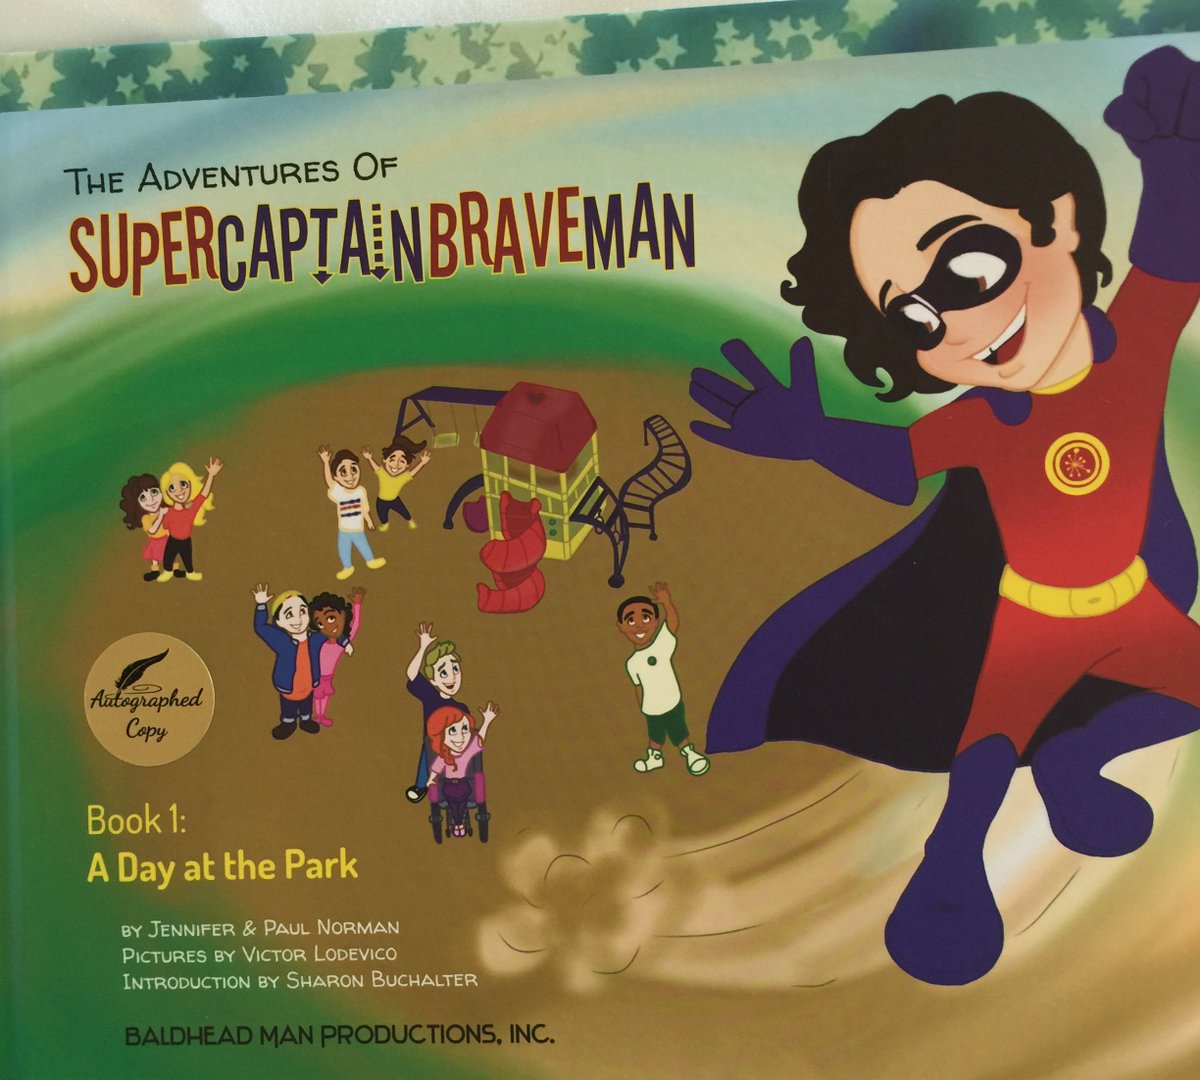 Happy10th????Day kyle #supercaptainbraveman
 ????Ur Book.Wish ALL 6yr Olds Would Read,B4 They Learned 2Laugh At Disabled???????? https://t.co/JlKJzgN6VL